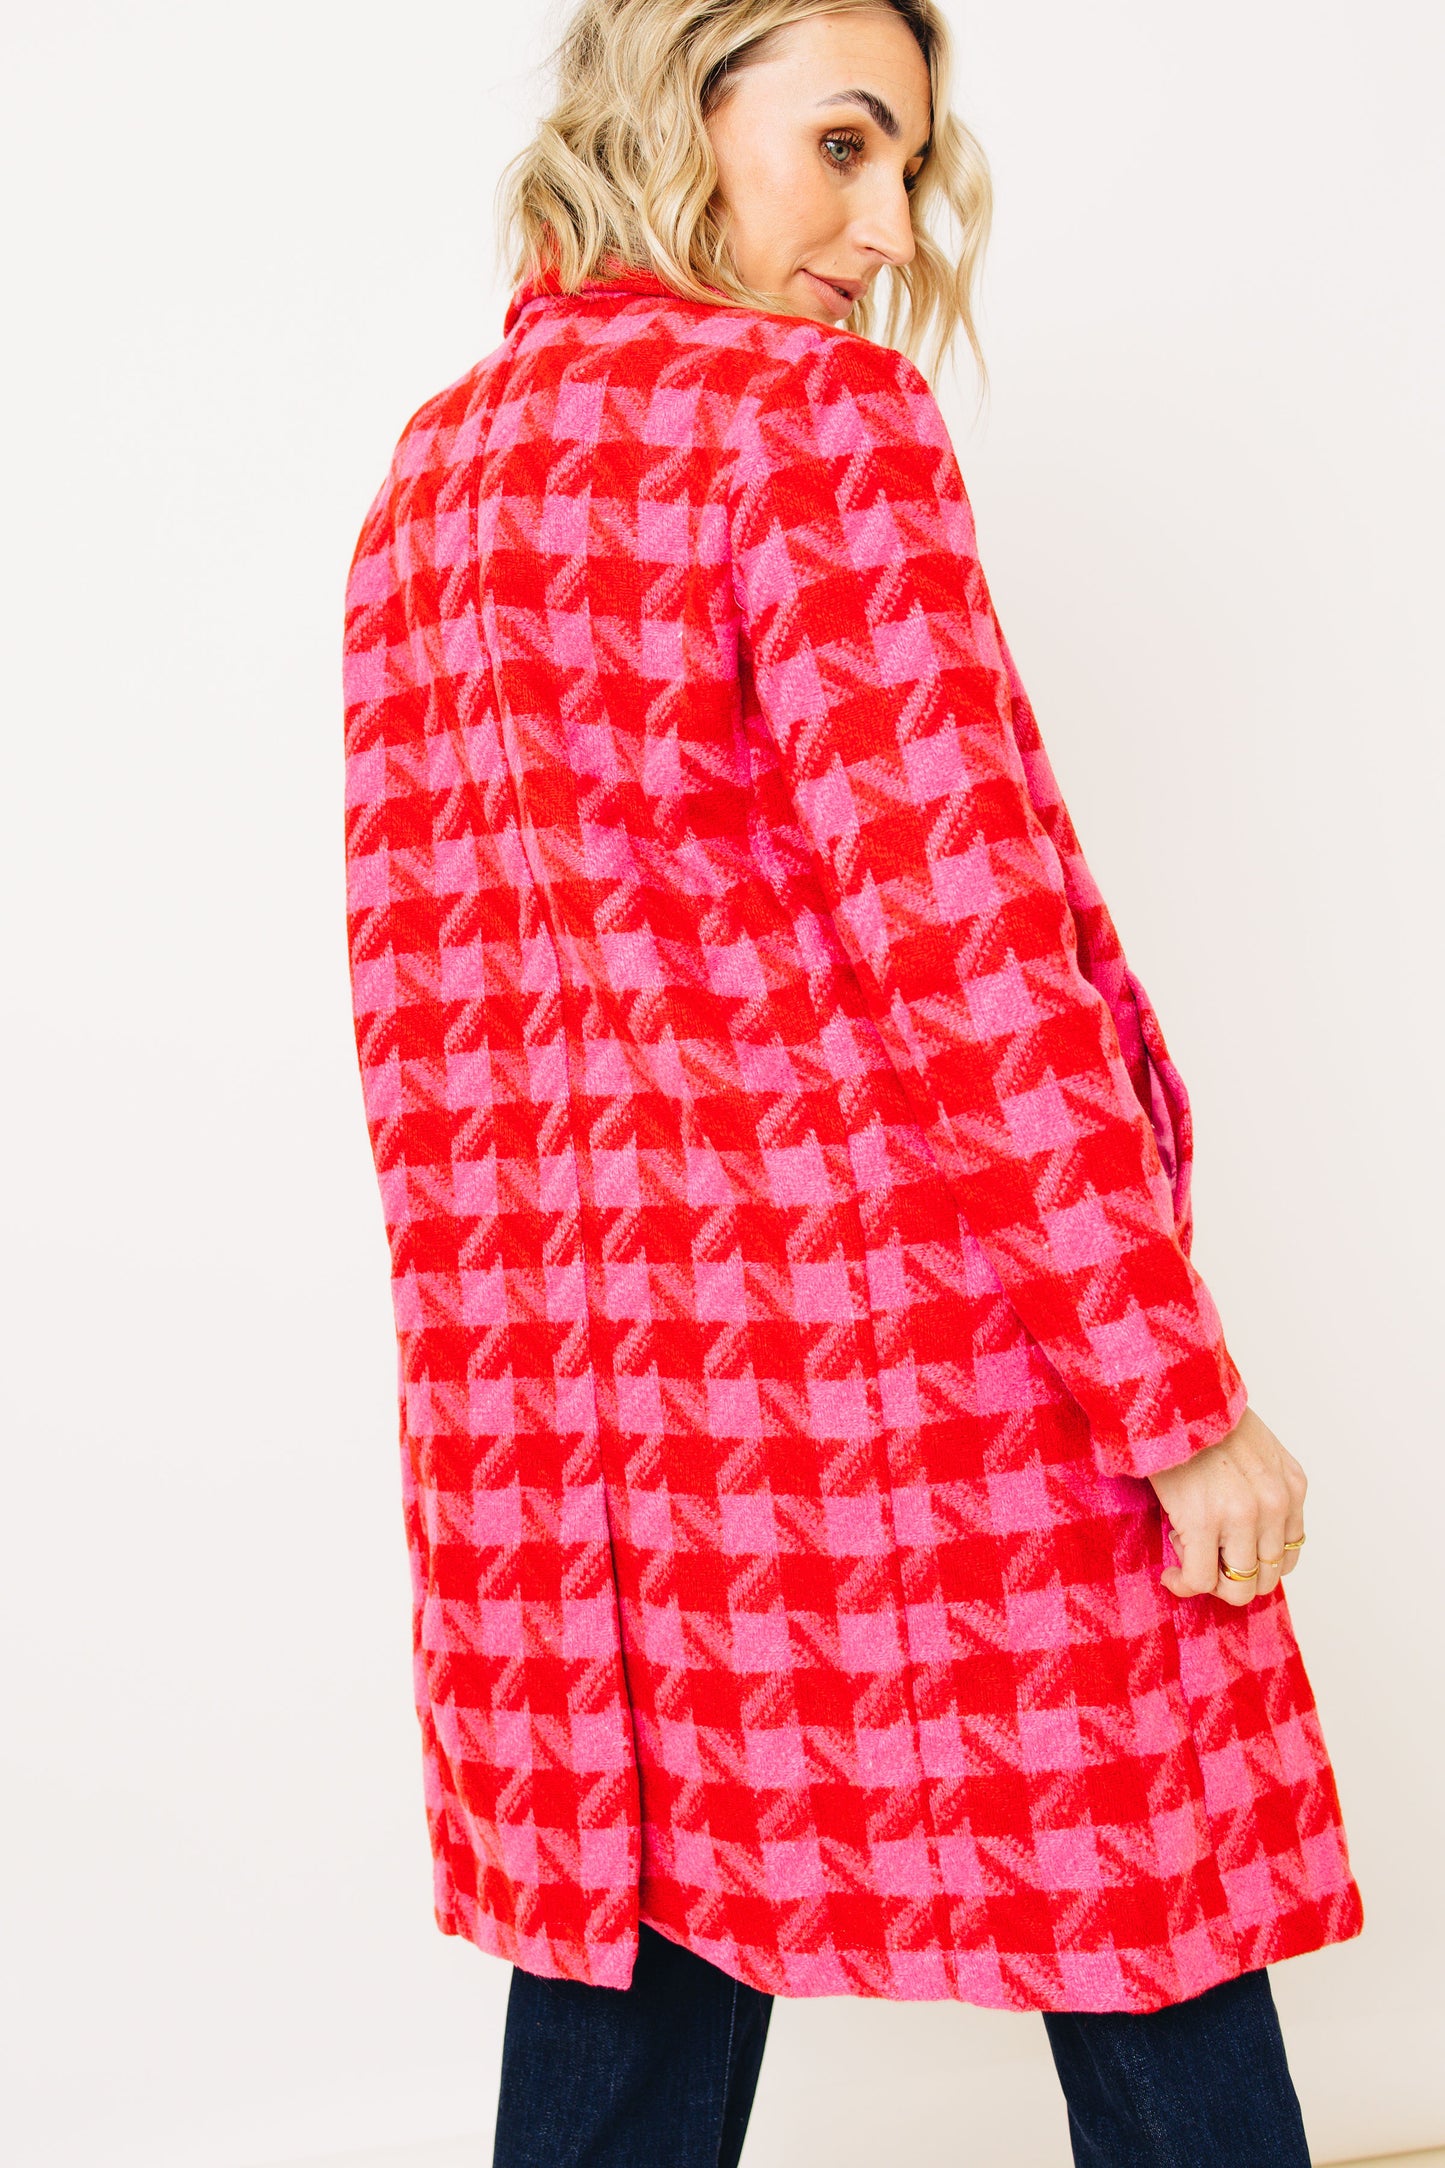 Pink and Red Houndstooth Blazer Coat  (S-3XL)